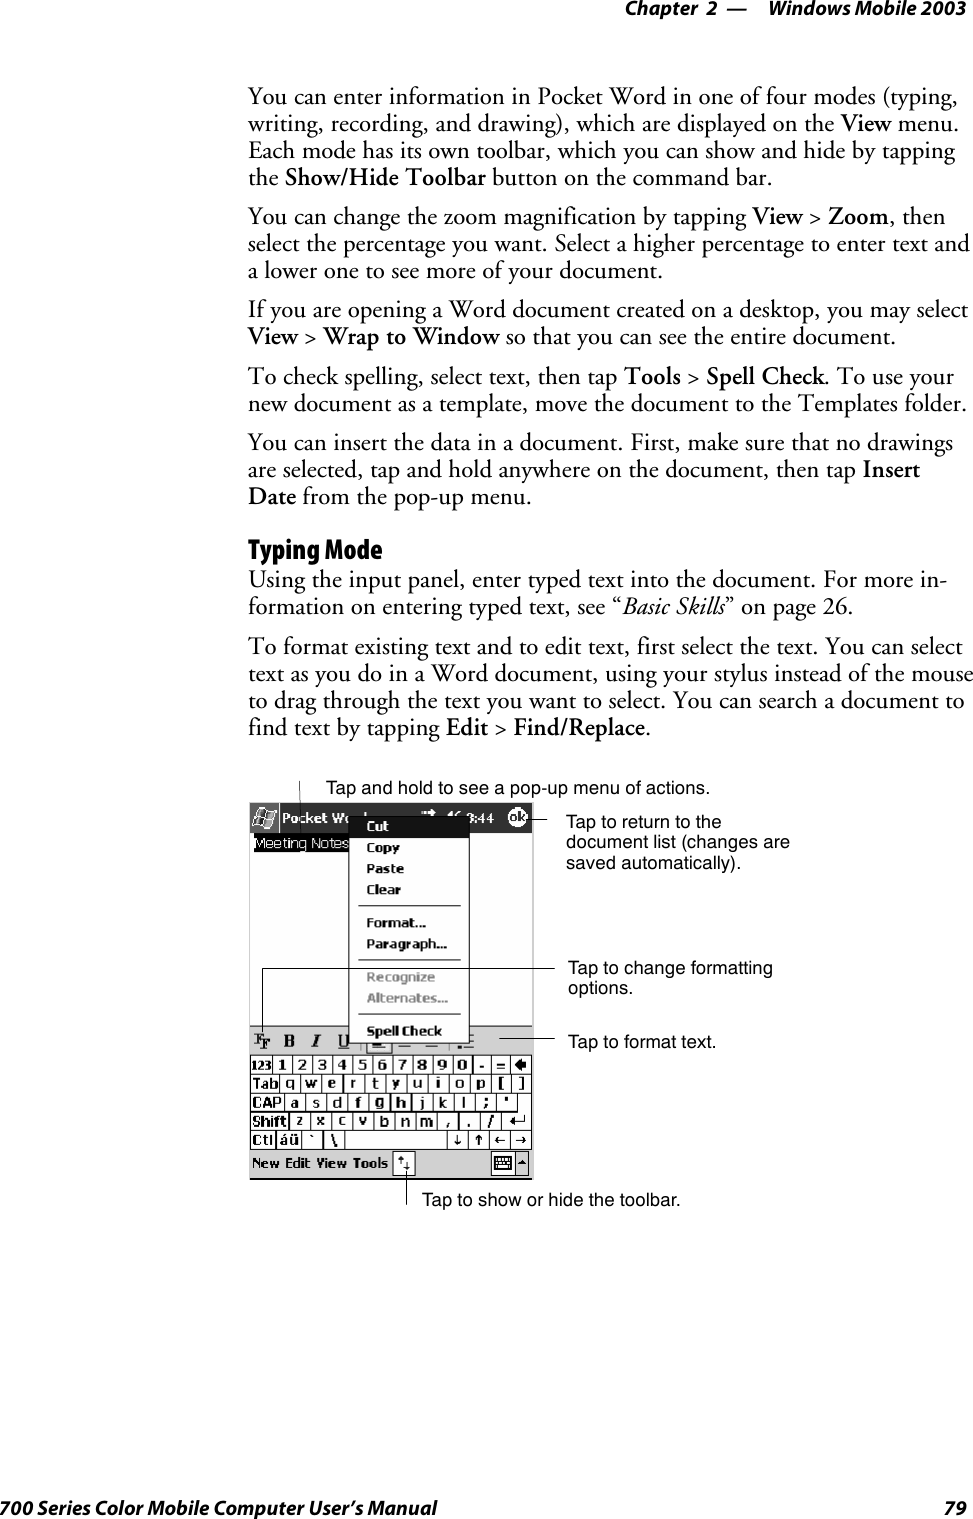 Windows Mobile 2003—Chapter 279700 Series Color Mobile Computer User’s ManualYou can enter information in Pocket Word in one of four modes (typing,writing, recording, and drawing), which are displayed on the View menu.Each mode has its own toolbar, which you can show and hide by tappingthe Show/Hide Toolbar buttononthecommandbar.You can change the zoom magnification by tapping View &gt;Zoom,thenselect the percentage you want. Select a higher percentage to enter text anda lower one to see more of your document.If you are opening a Word document created on a desktop, you may selectView &gt;Wrap to Window so that you can see the entire document.To check spelling, select text, then tap Tools &gt;Spell Check.Touseyournew document as a template, move the document to the Templates folder.You can insert the data in a document. First, make sure that no drawingsare selected, tap and hold anywhere on the document, then tap InsertDate from the pop-up menu.Typing ModeUsing the input panel, enter typed text into the document. For more in-formation on entering typed text, see “Basic Skills” on page 26.To format existing text and to edit text, first select the text. You can selecttext as you do in a Word document, using your stylus instead of the mouseto drag through the text you want to select. You can search a document tofind text by tapping Edit &gt;Find/Replace.Tap to show or hide the toolbar.Tap to change formattingoptions.Taptoformattext.Taptoreturntothedocument list (changes aresaved automatically).Tap and hold to see a pop-up menu of actions.